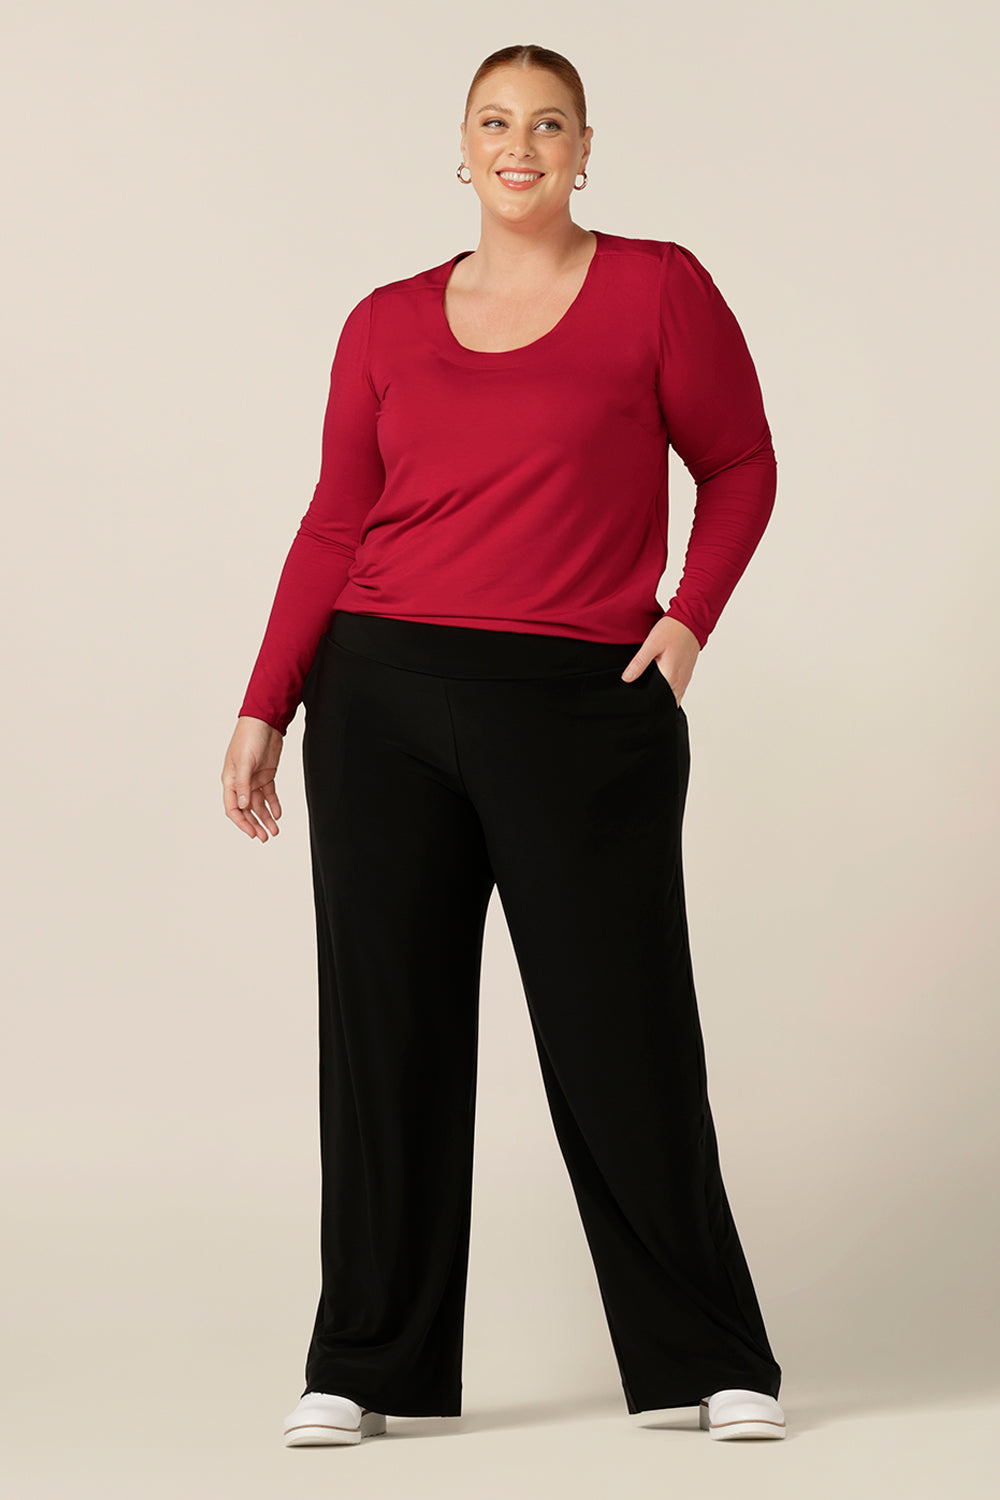 A round neck, long sleeve top for plus size and fuller figure women. Worn with wide leg black pants, this casual top is styled for weekend wear. In red bamboo jersey, this comfortable top is made in Australia in an inclusive 8-24 size range.